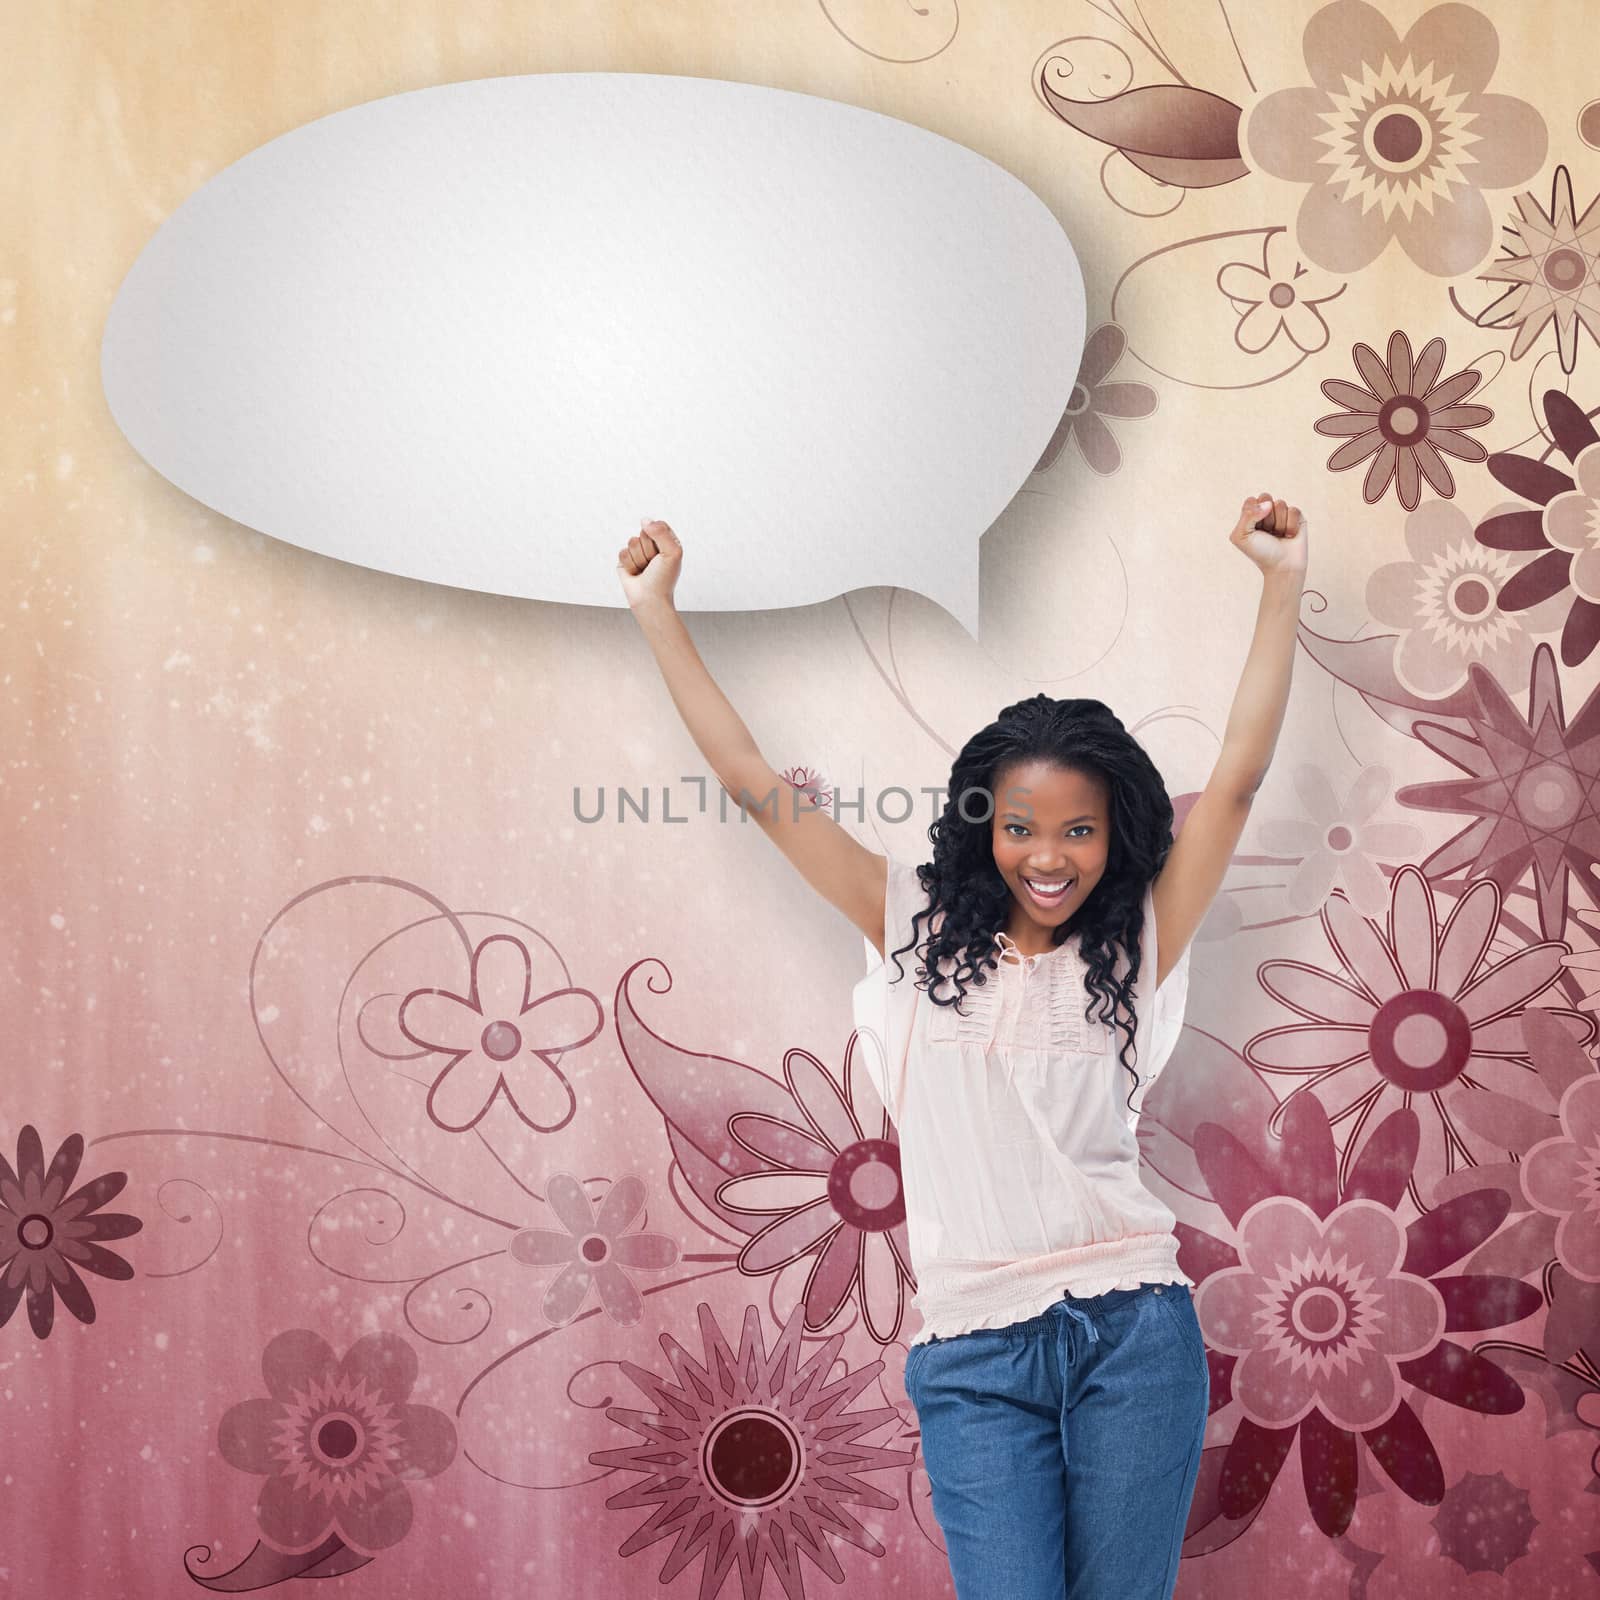 A young happy woman stands with speech bubble against digitally generated girly floral design